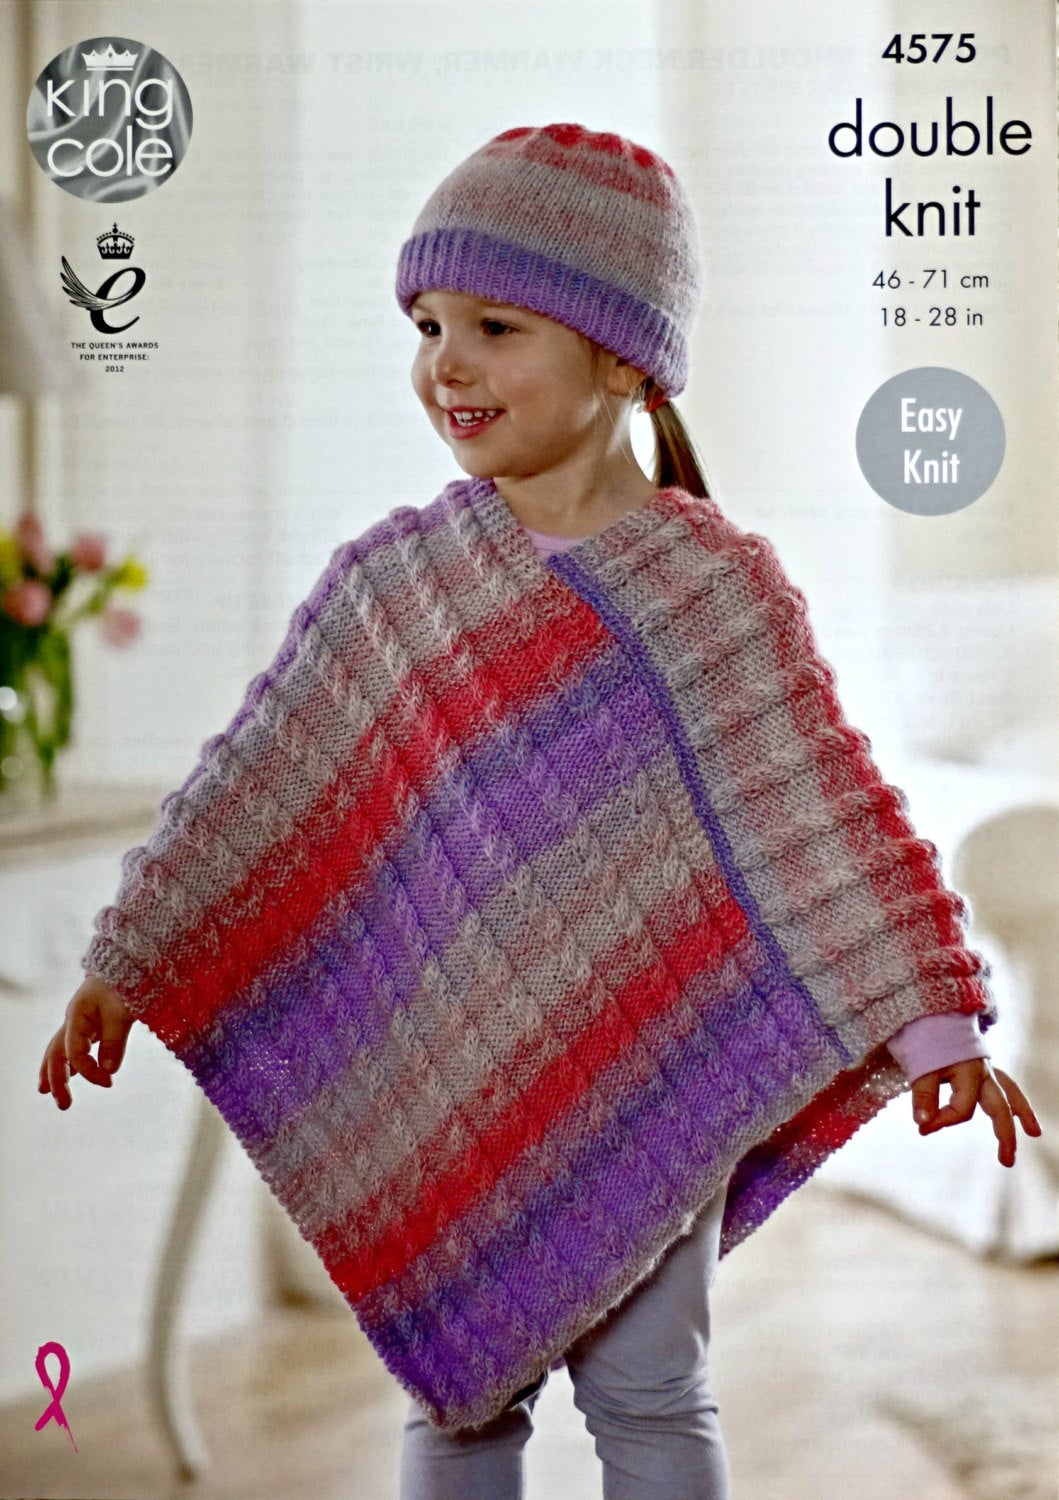 Knitting Pattern For Childs Poncho Girls Knitting Pattern K4575 Girls Easy Knit Cable Poncho And Hat Knitting Pattern Sprite Dk Light Worsted King Cole